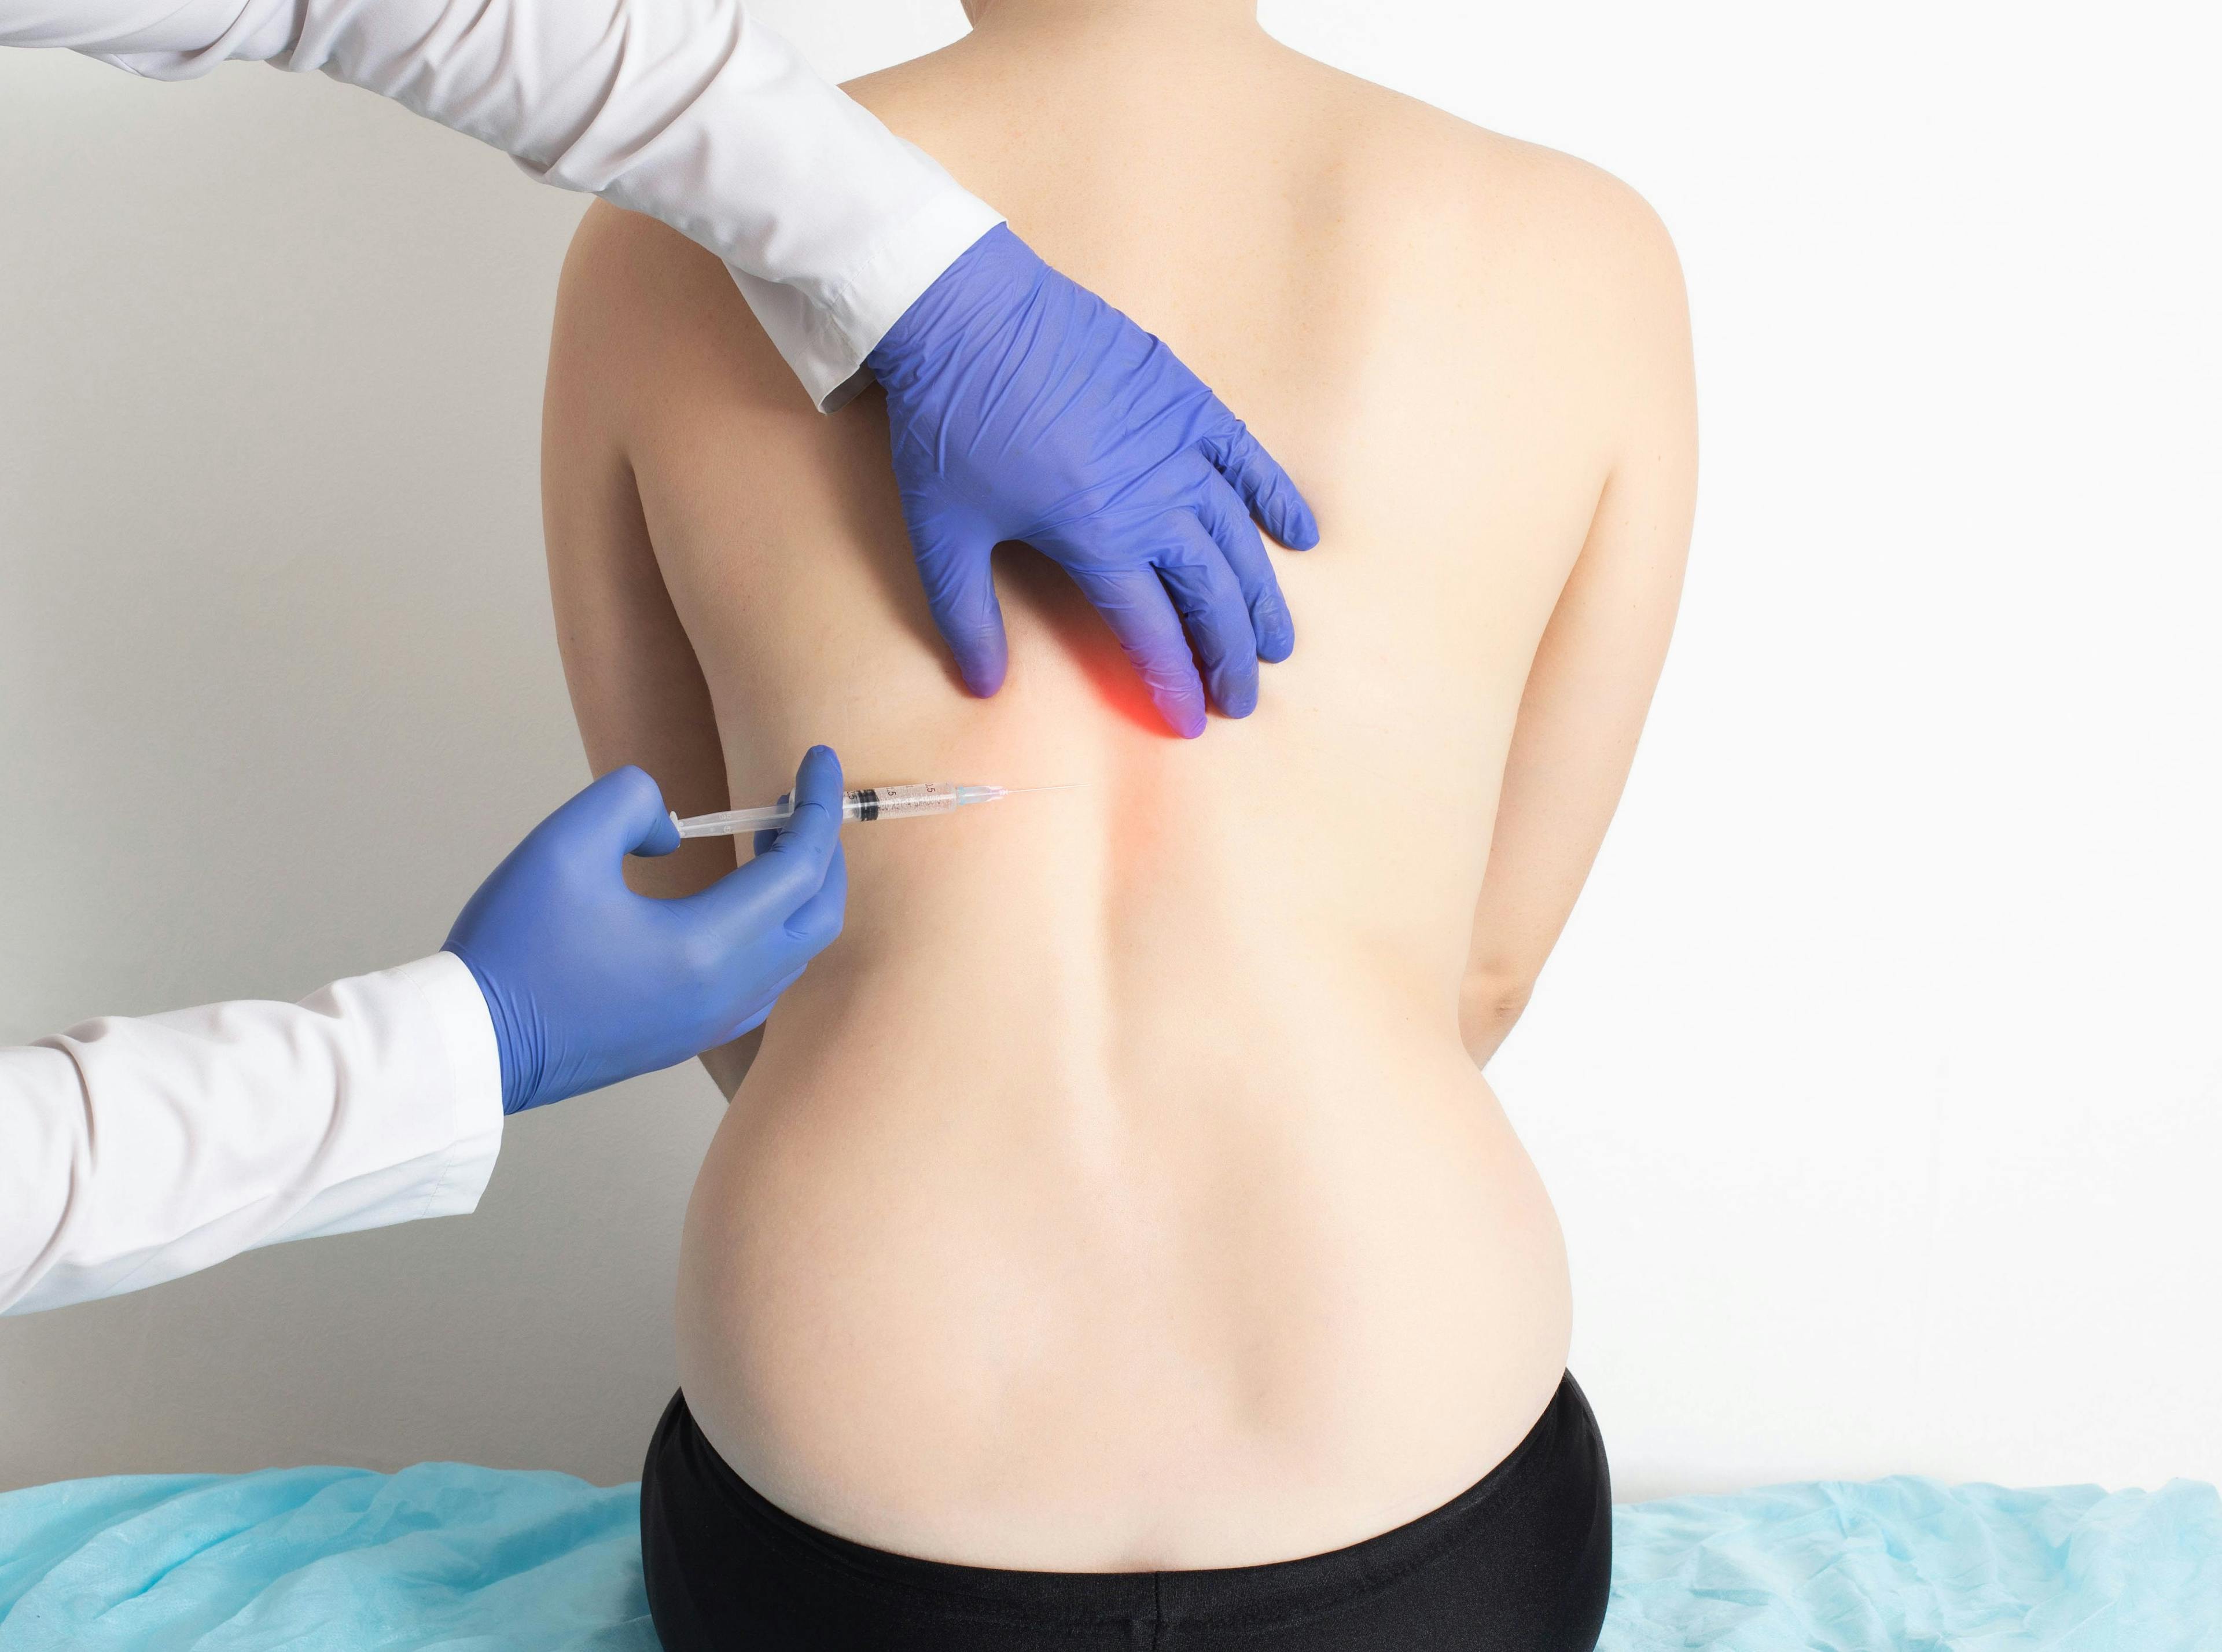 Patient receives injection of ozone therapy | Image Credit: HENADZY - stock.adobe.com